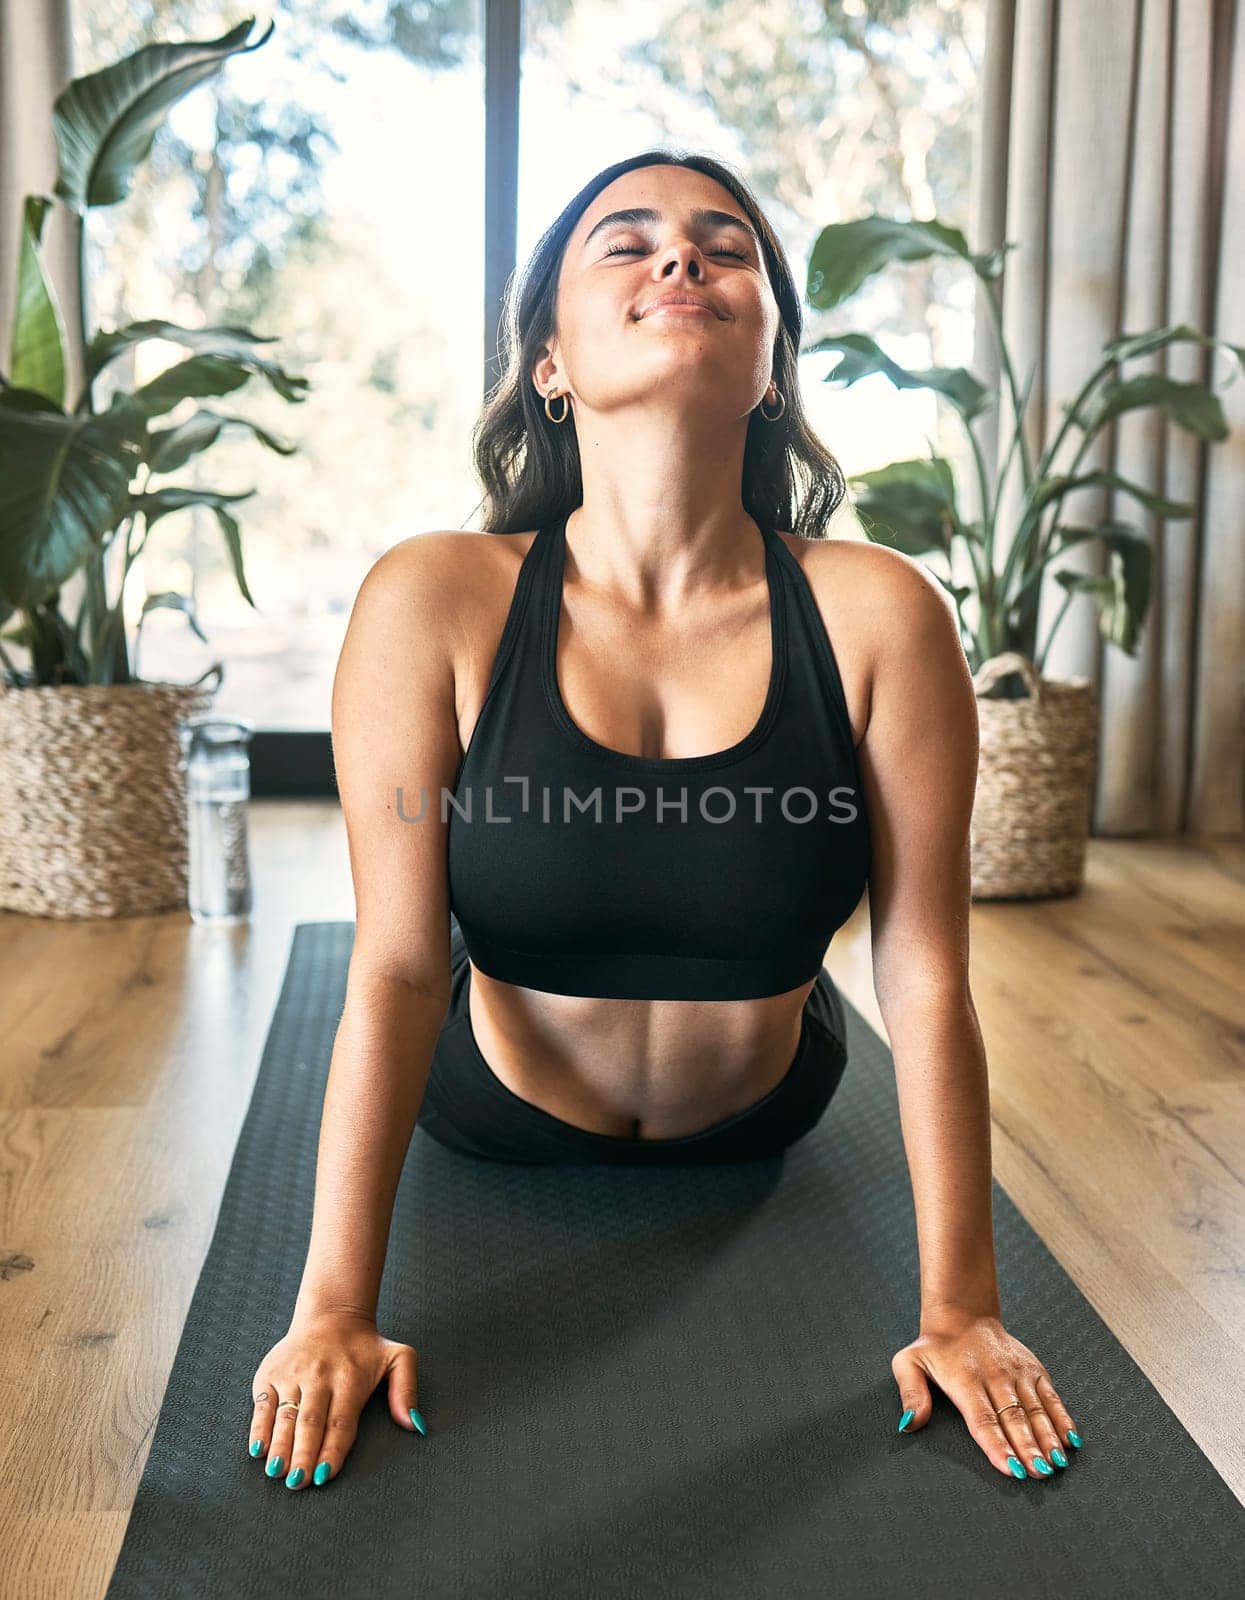 Yoga meditation, cobra stretch and woman in home for health, wellness and flexibility exercise. Pilates, workout and female yogi stretching, holistic training and exercising in house for fitness. by YuriArcurs